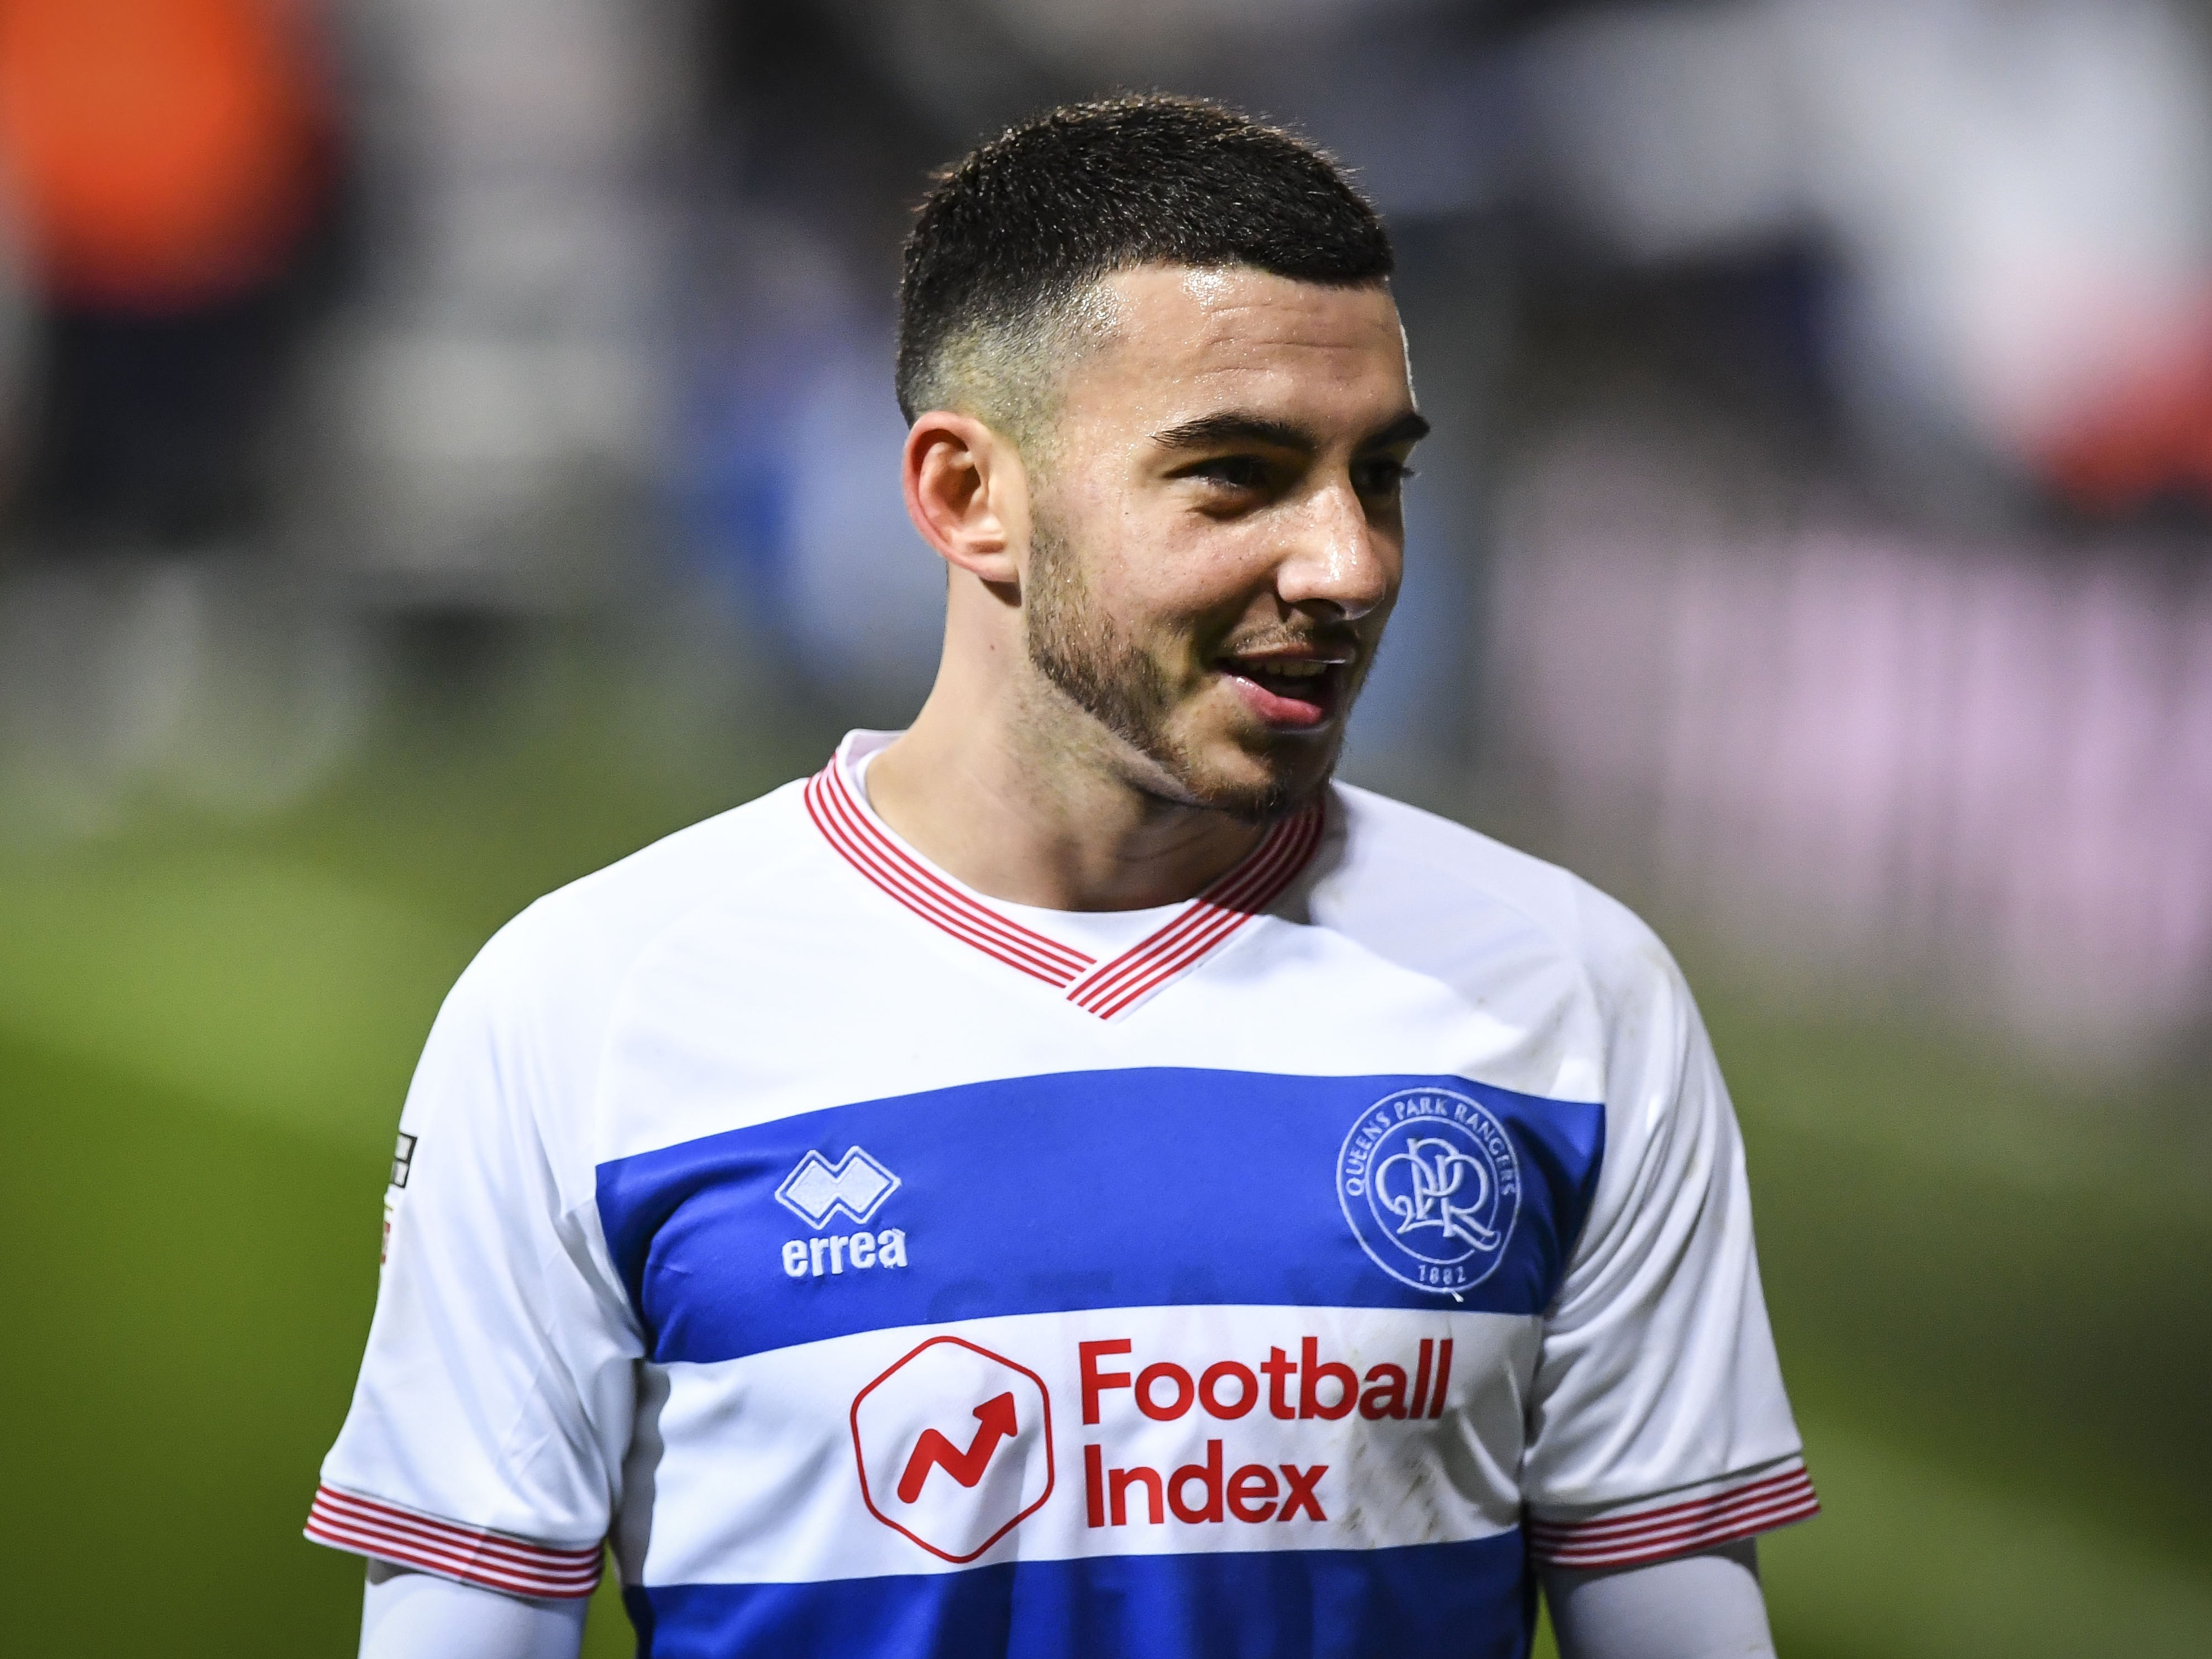 QPR's Ilias Chair: 'Pressure is what my family went through. Playing football is a blessing' | The Independent